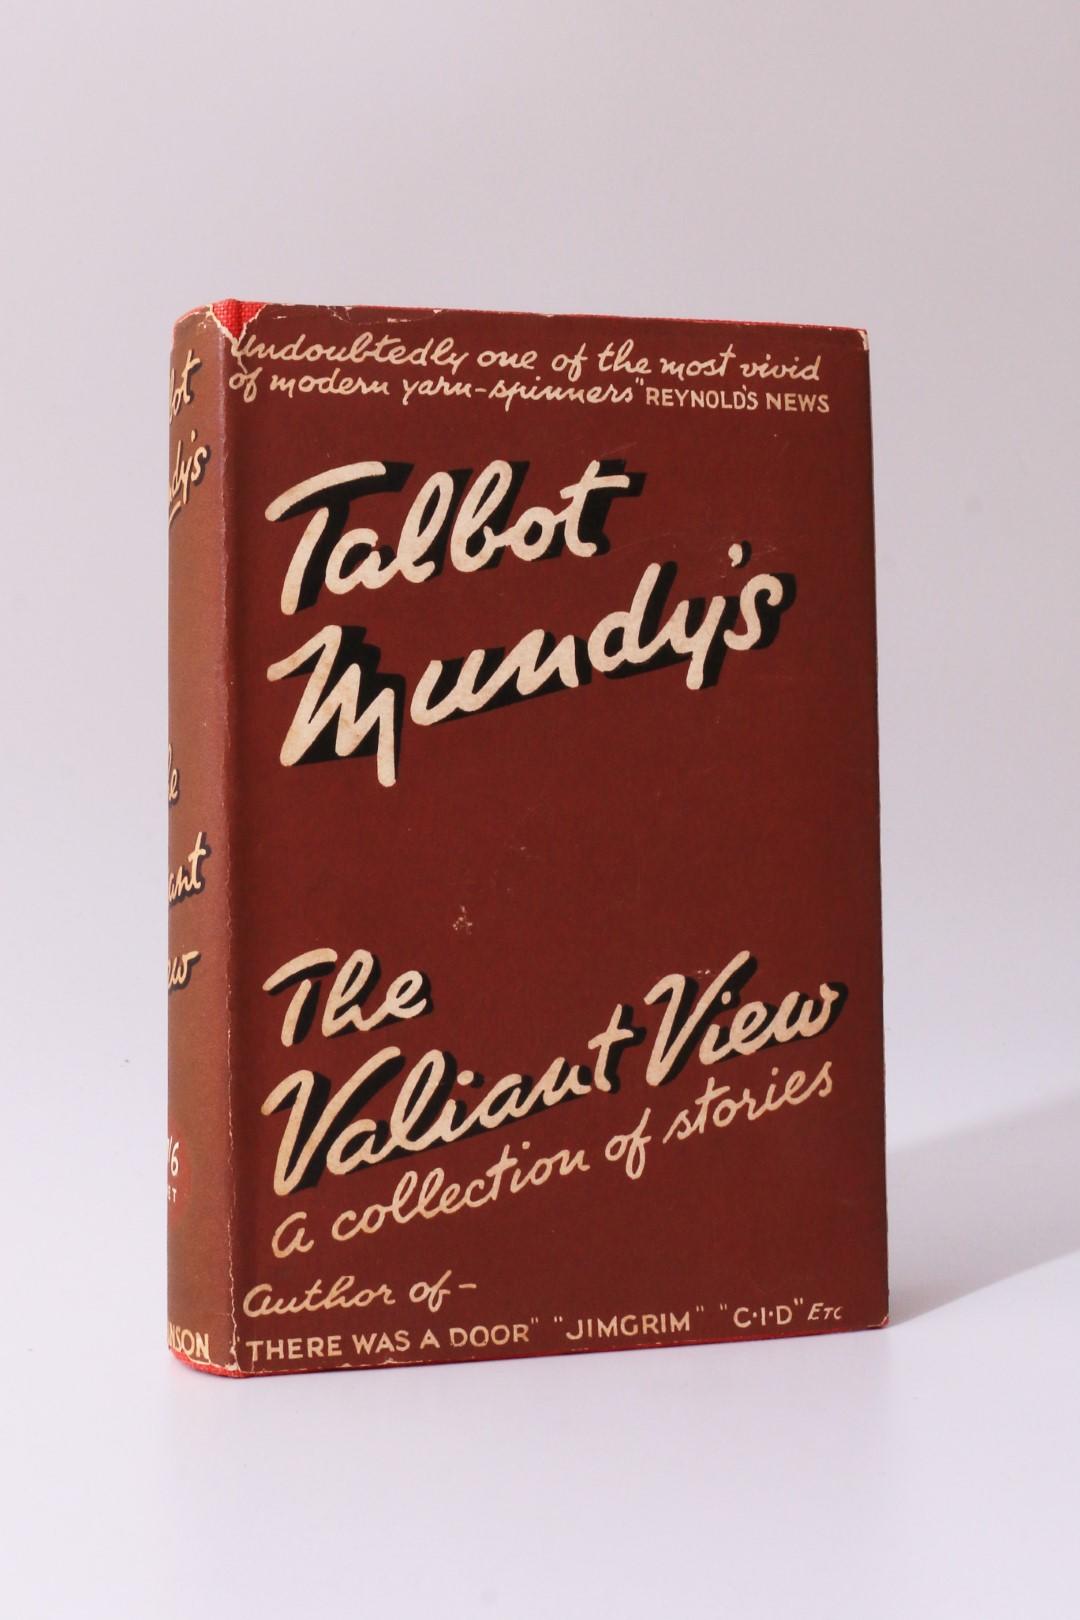 Talbot Mundy - Talbot Mundy's The Valiant View: A Collection of Stories - Hutchinson, n.d. [1939], First Edition.